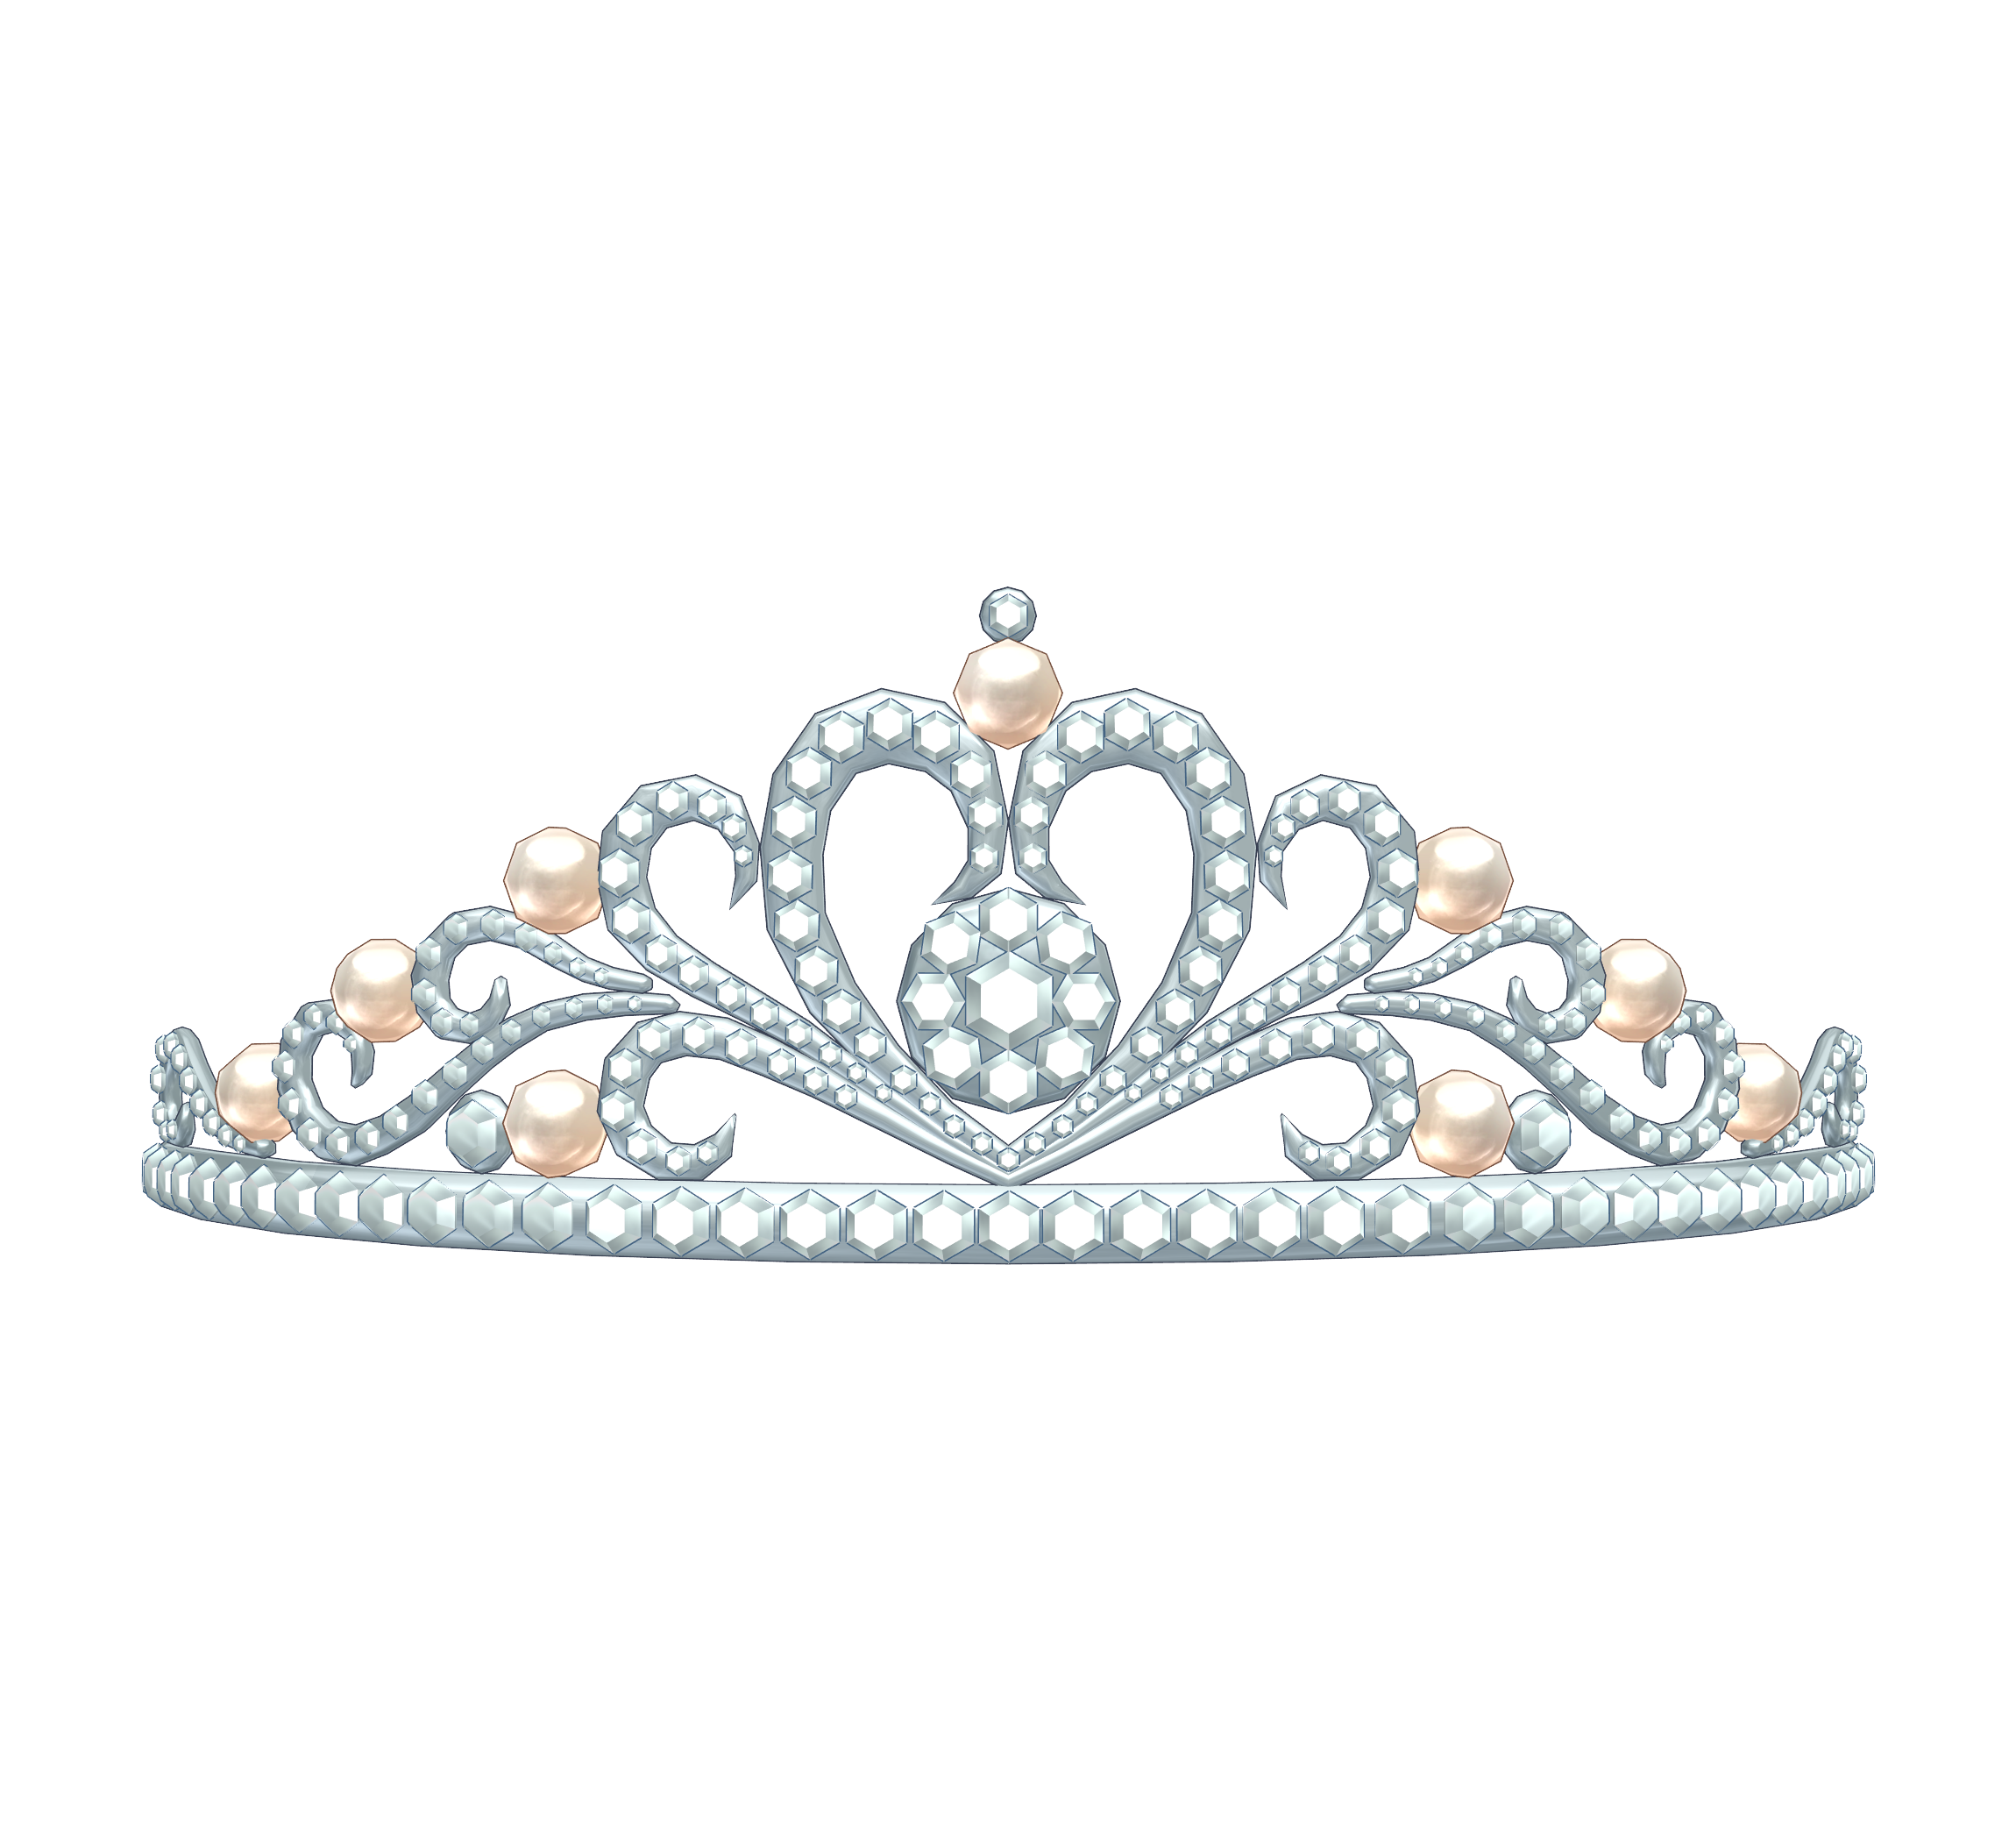 Mmd___Pretty_Tiara_Download_By_Harulikescarrots D7Qtldl.png (2300×2100) - Tiara Images, Transparent background PNG HD thumbnail